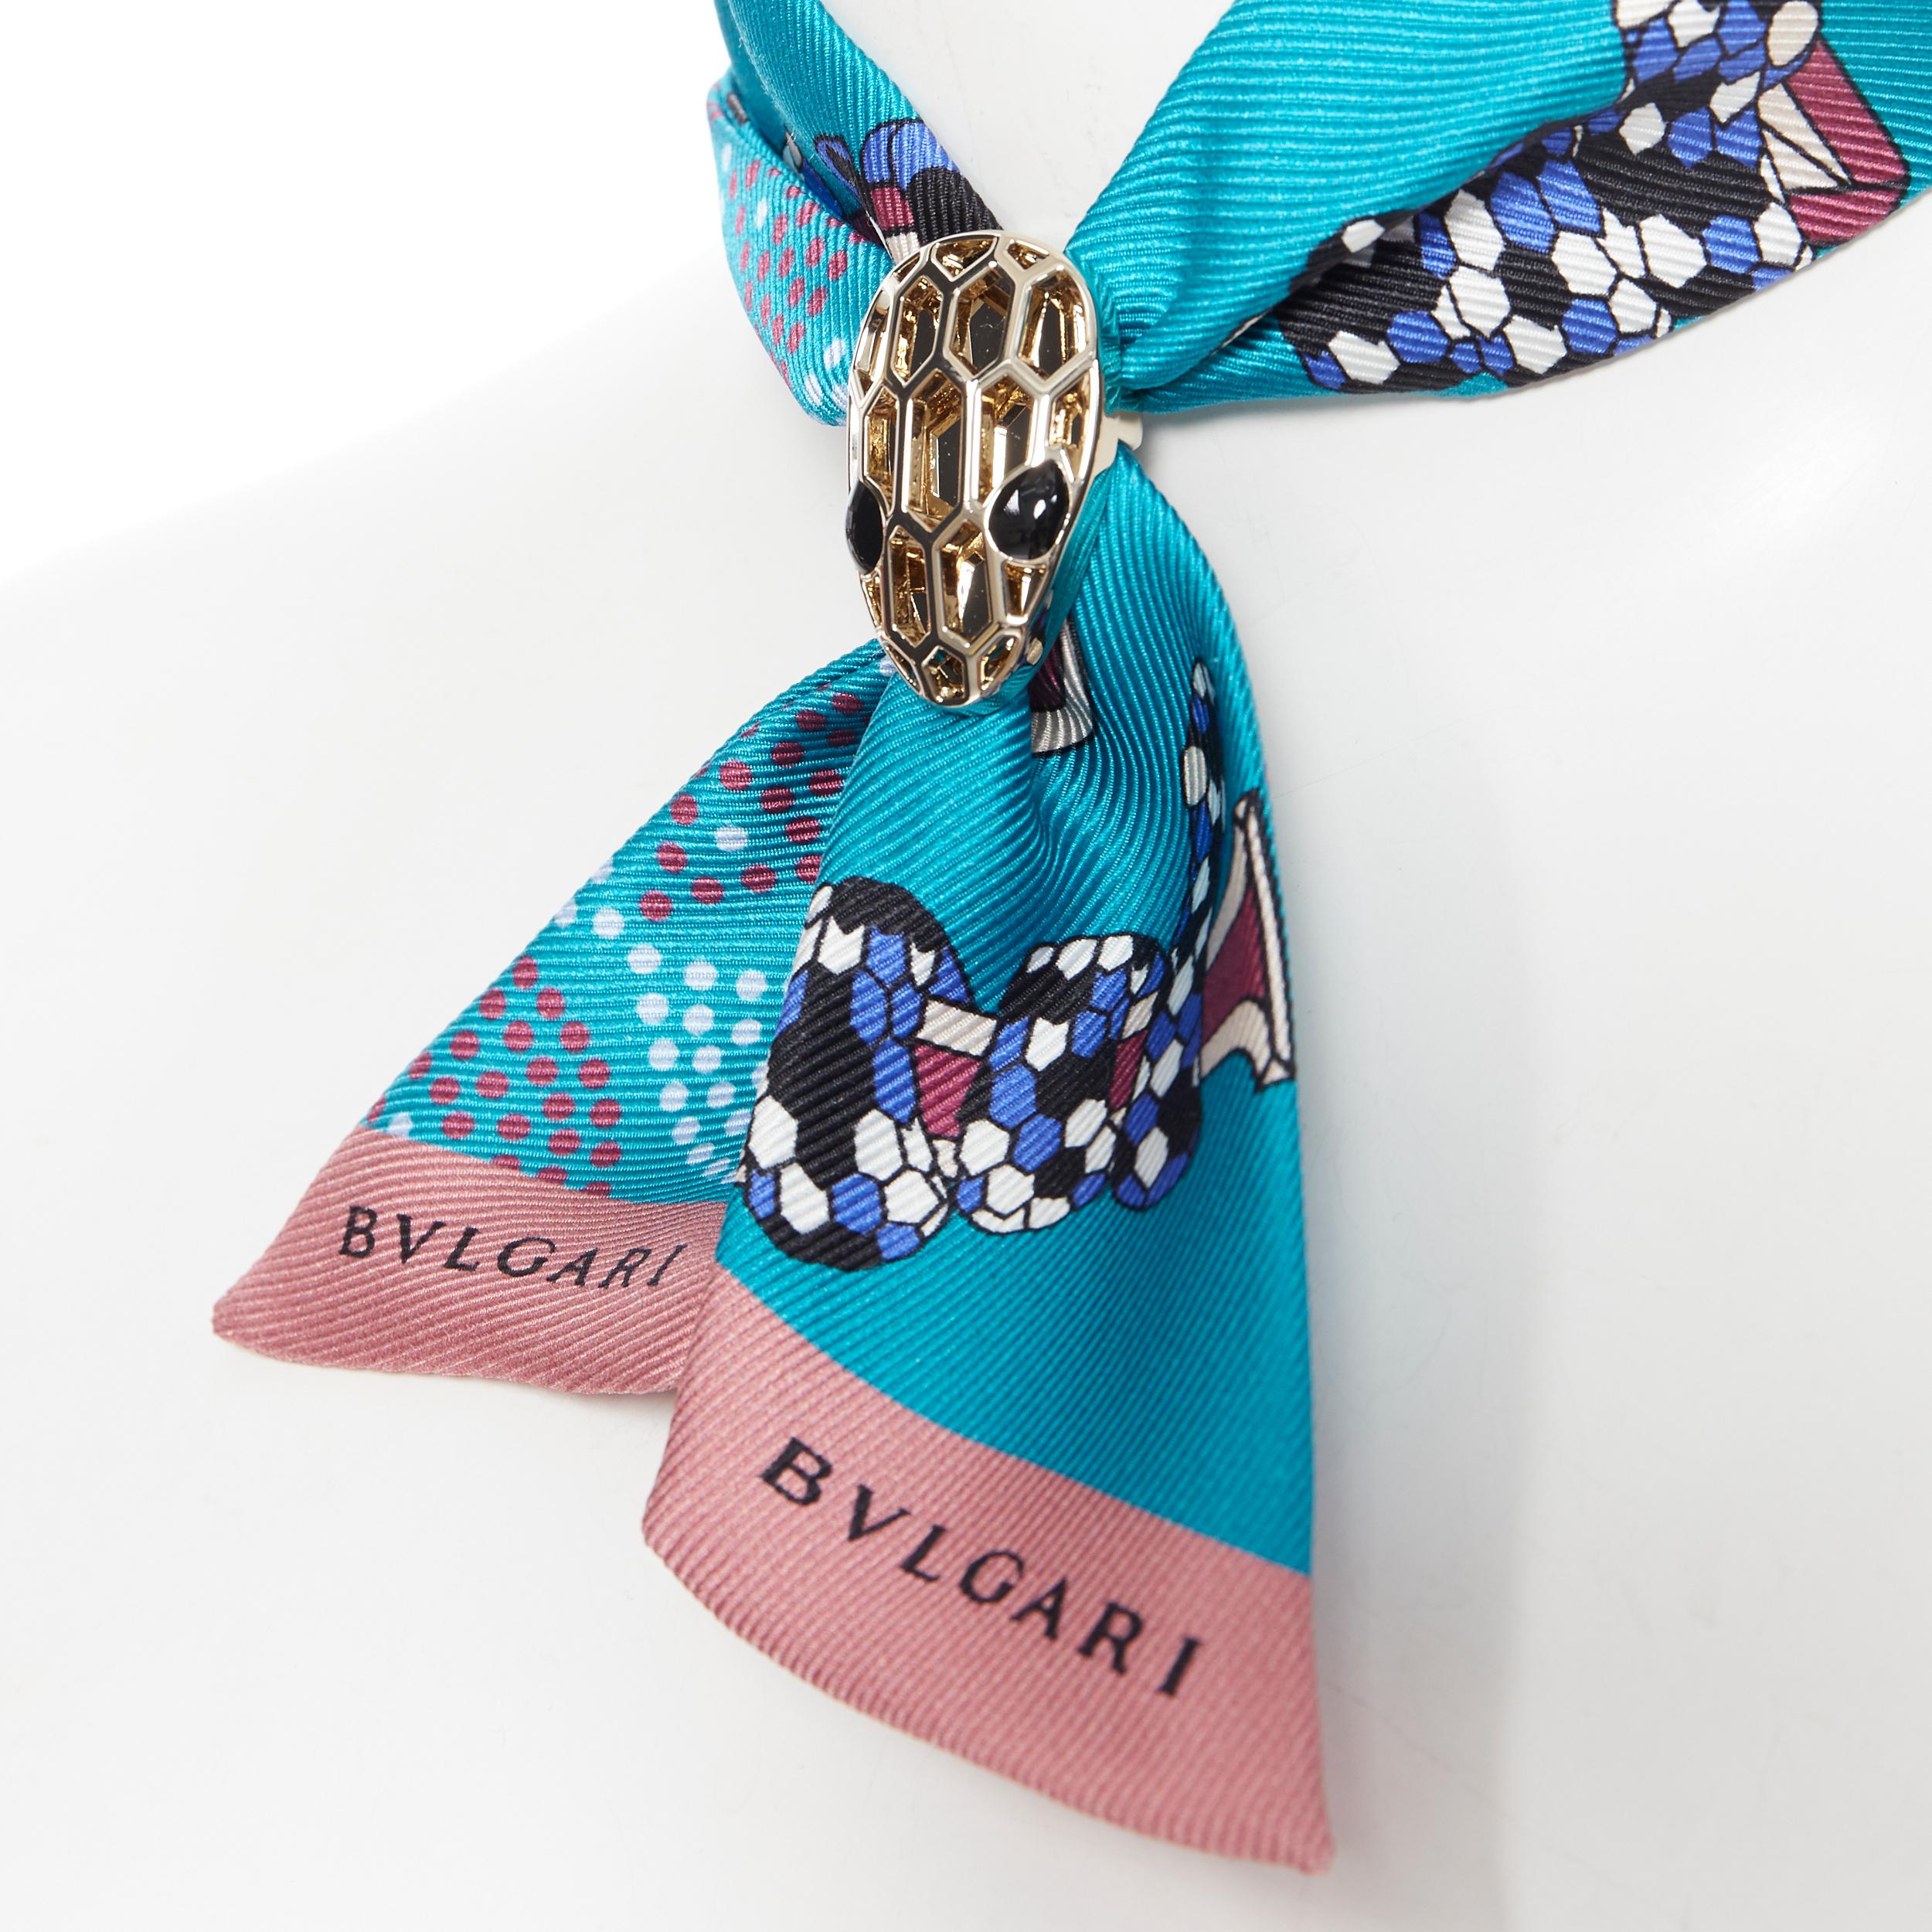 new BVLGARI Serpenti Tie Me Signature Shelleys blue silk neck scarf twilly bag 
Brand: Bvlgari
Collection: Serpenti Forever
Model Name / Style: Silk twilly
Material: Silk
Color: Blue
Pattern: Abstract
Closure: Clasp
Extra Detail: Silk print twilly.